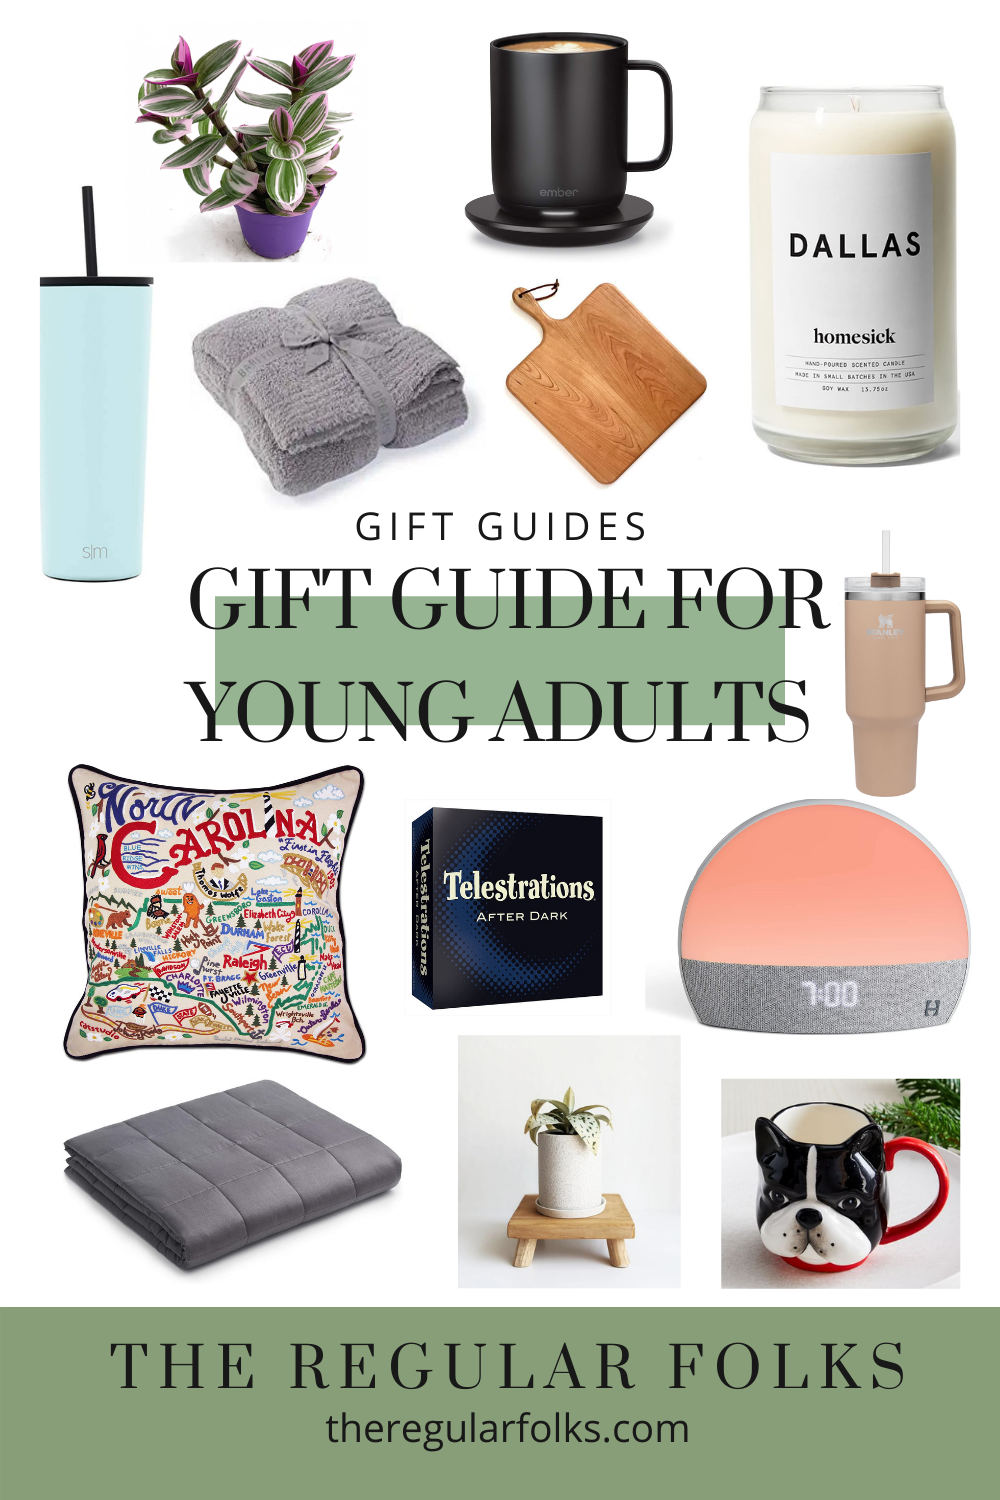 Gift Guide for Young Adults - The Regular Folks